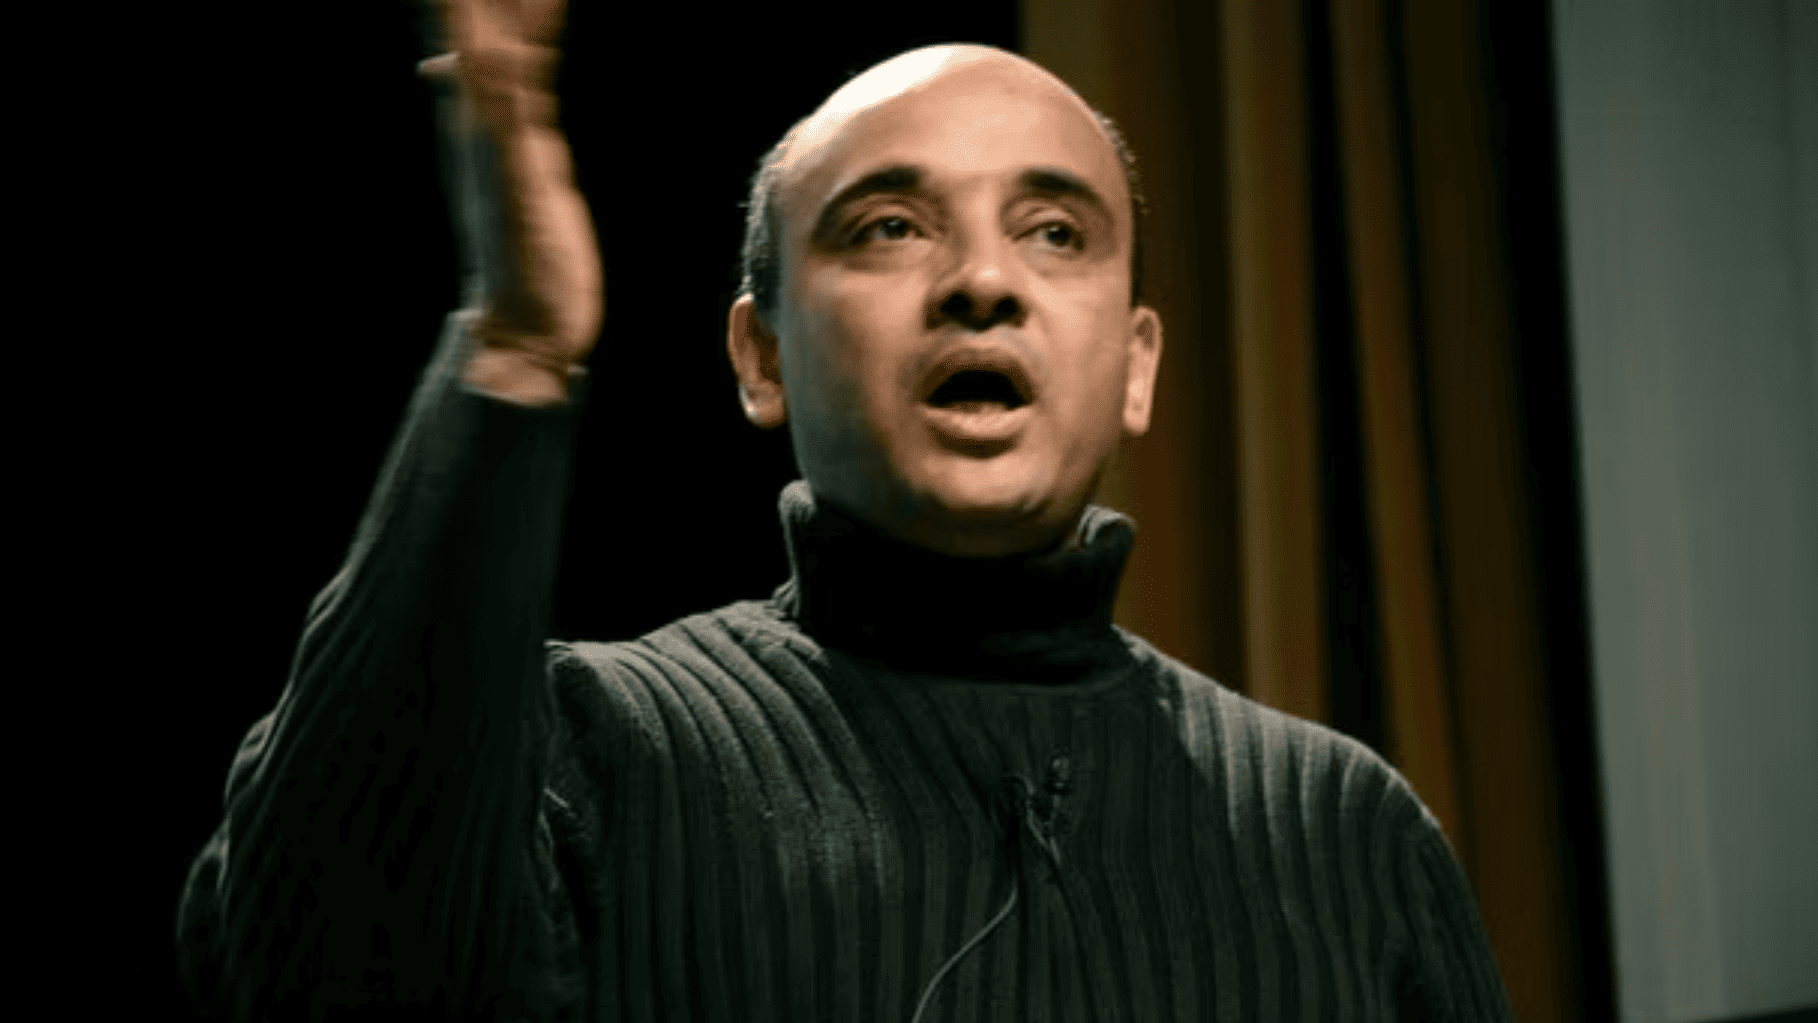 Kwame Anthony Appiah, a dark-skinned man wearing a turtleneck